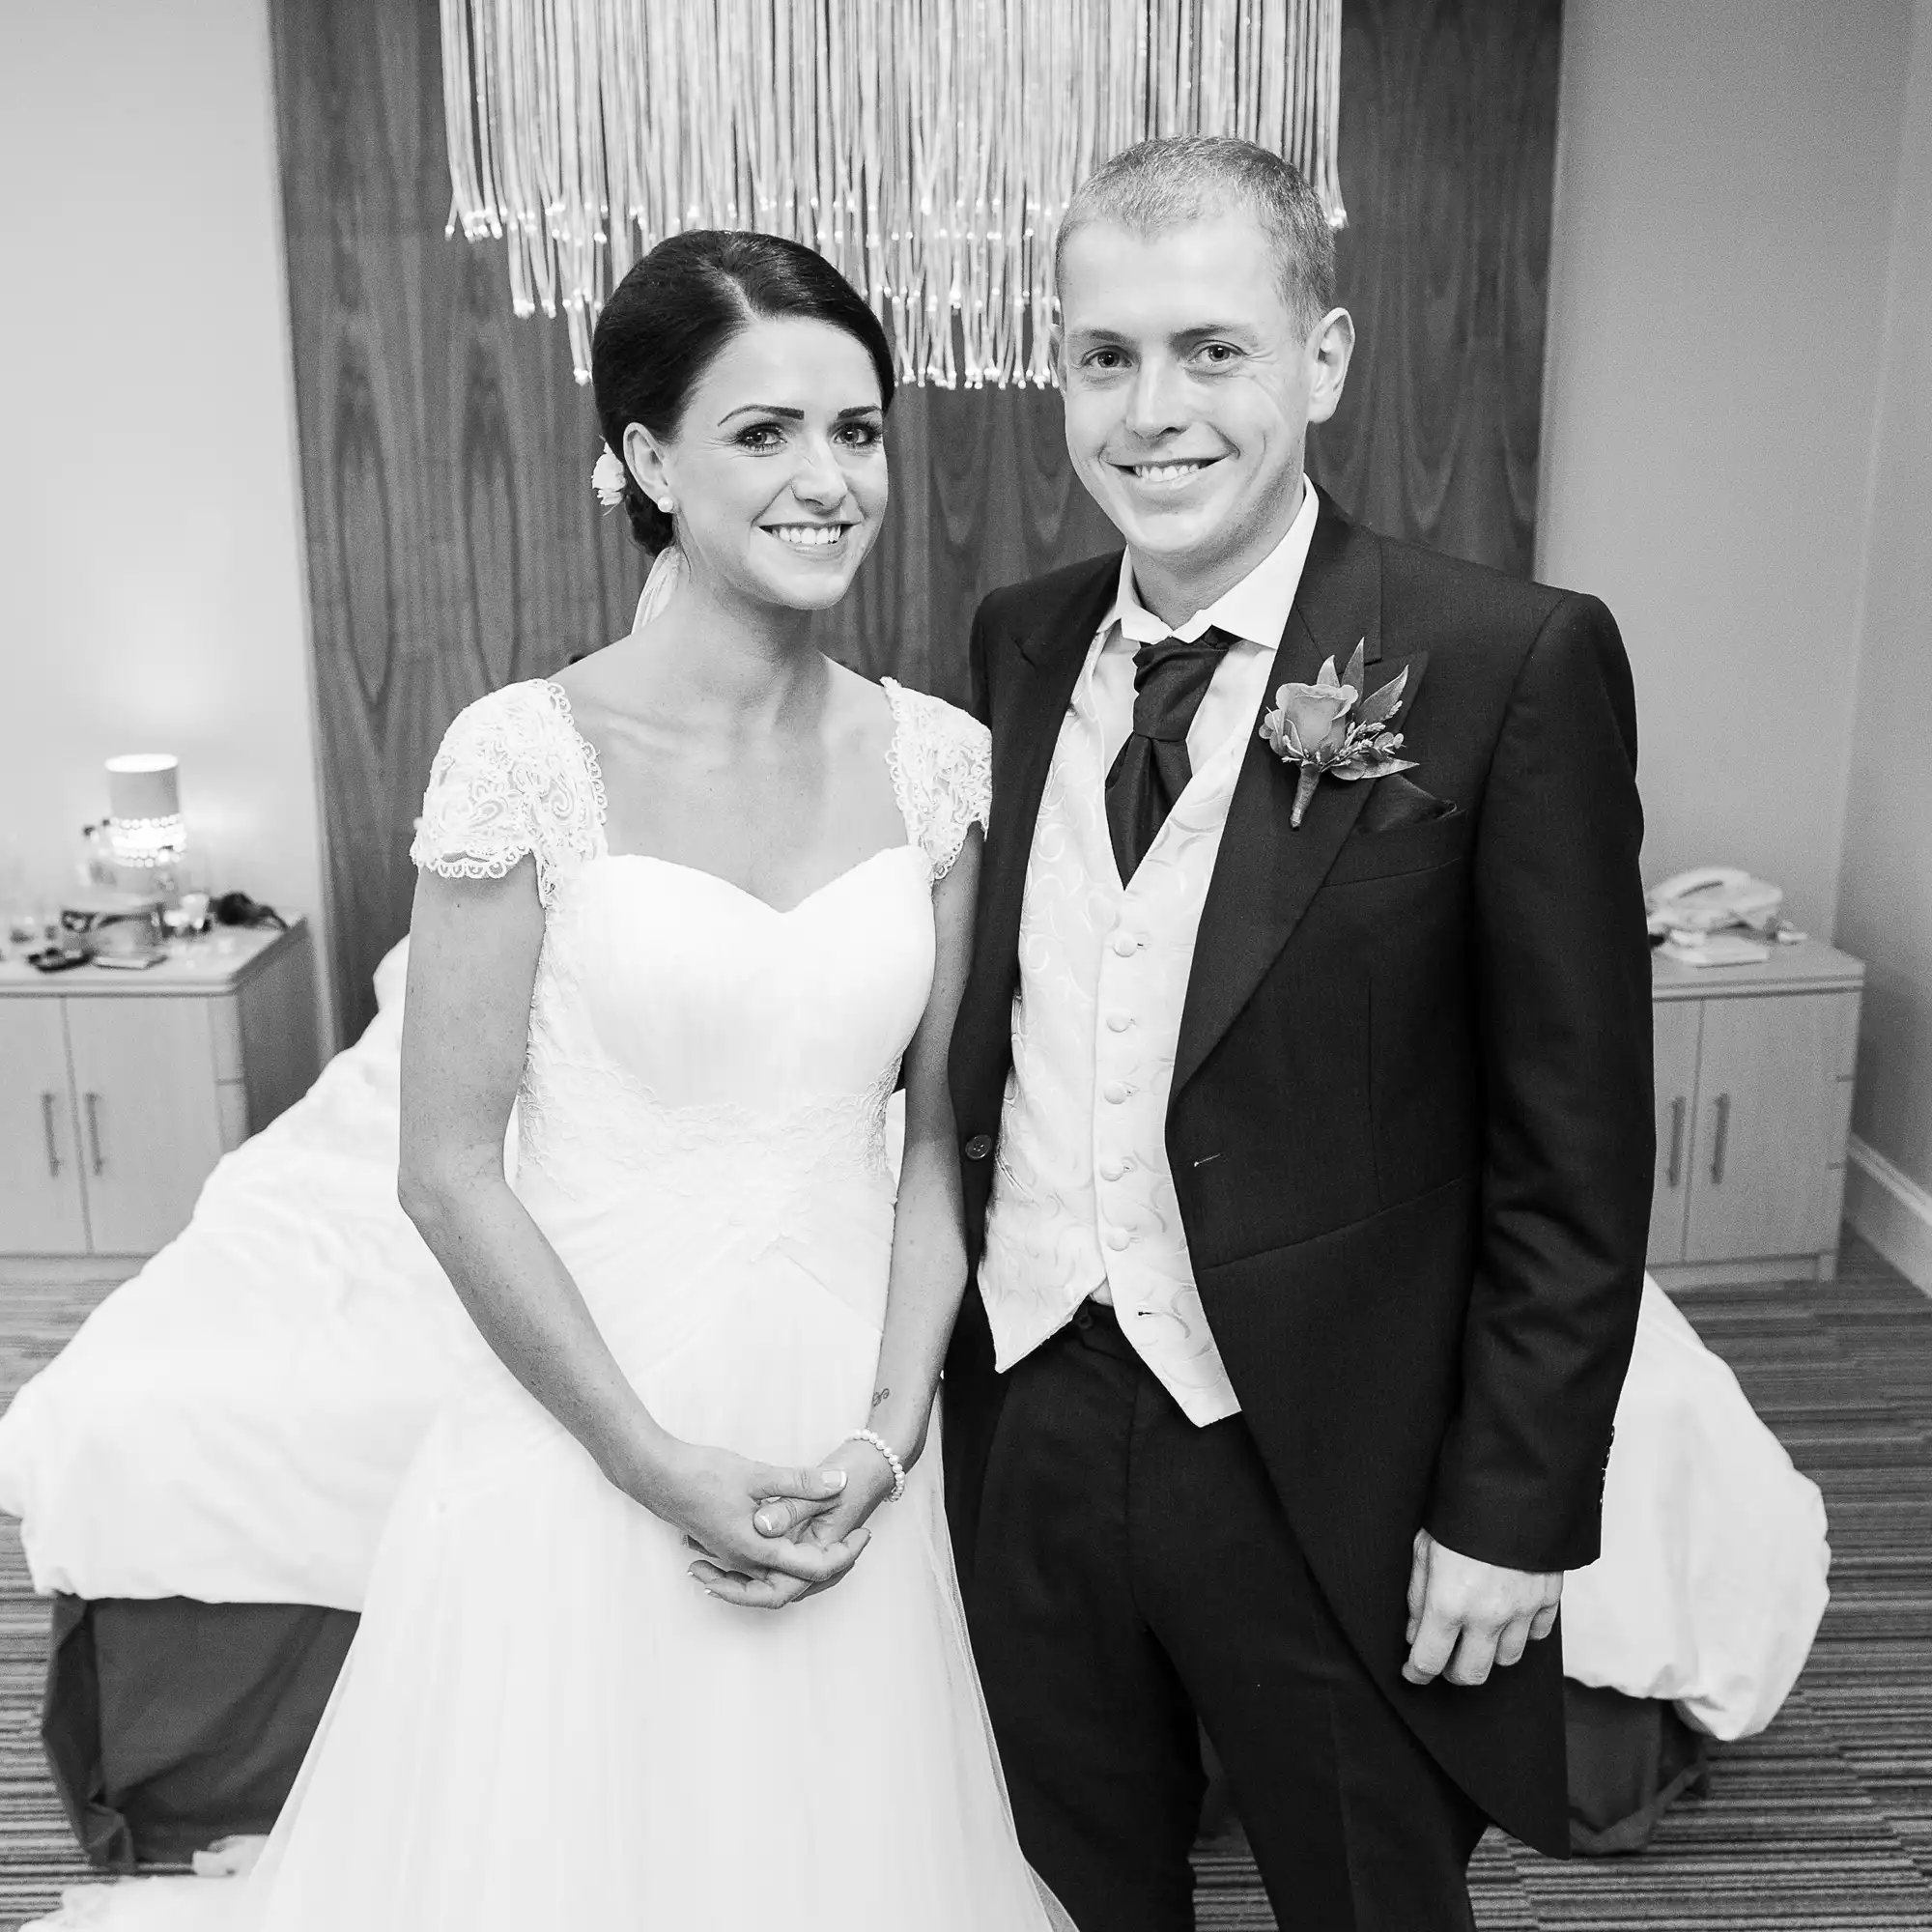 A smiling bride in a lace dress and a groom in a suit holding hands at their wedding, in a black and white photo.